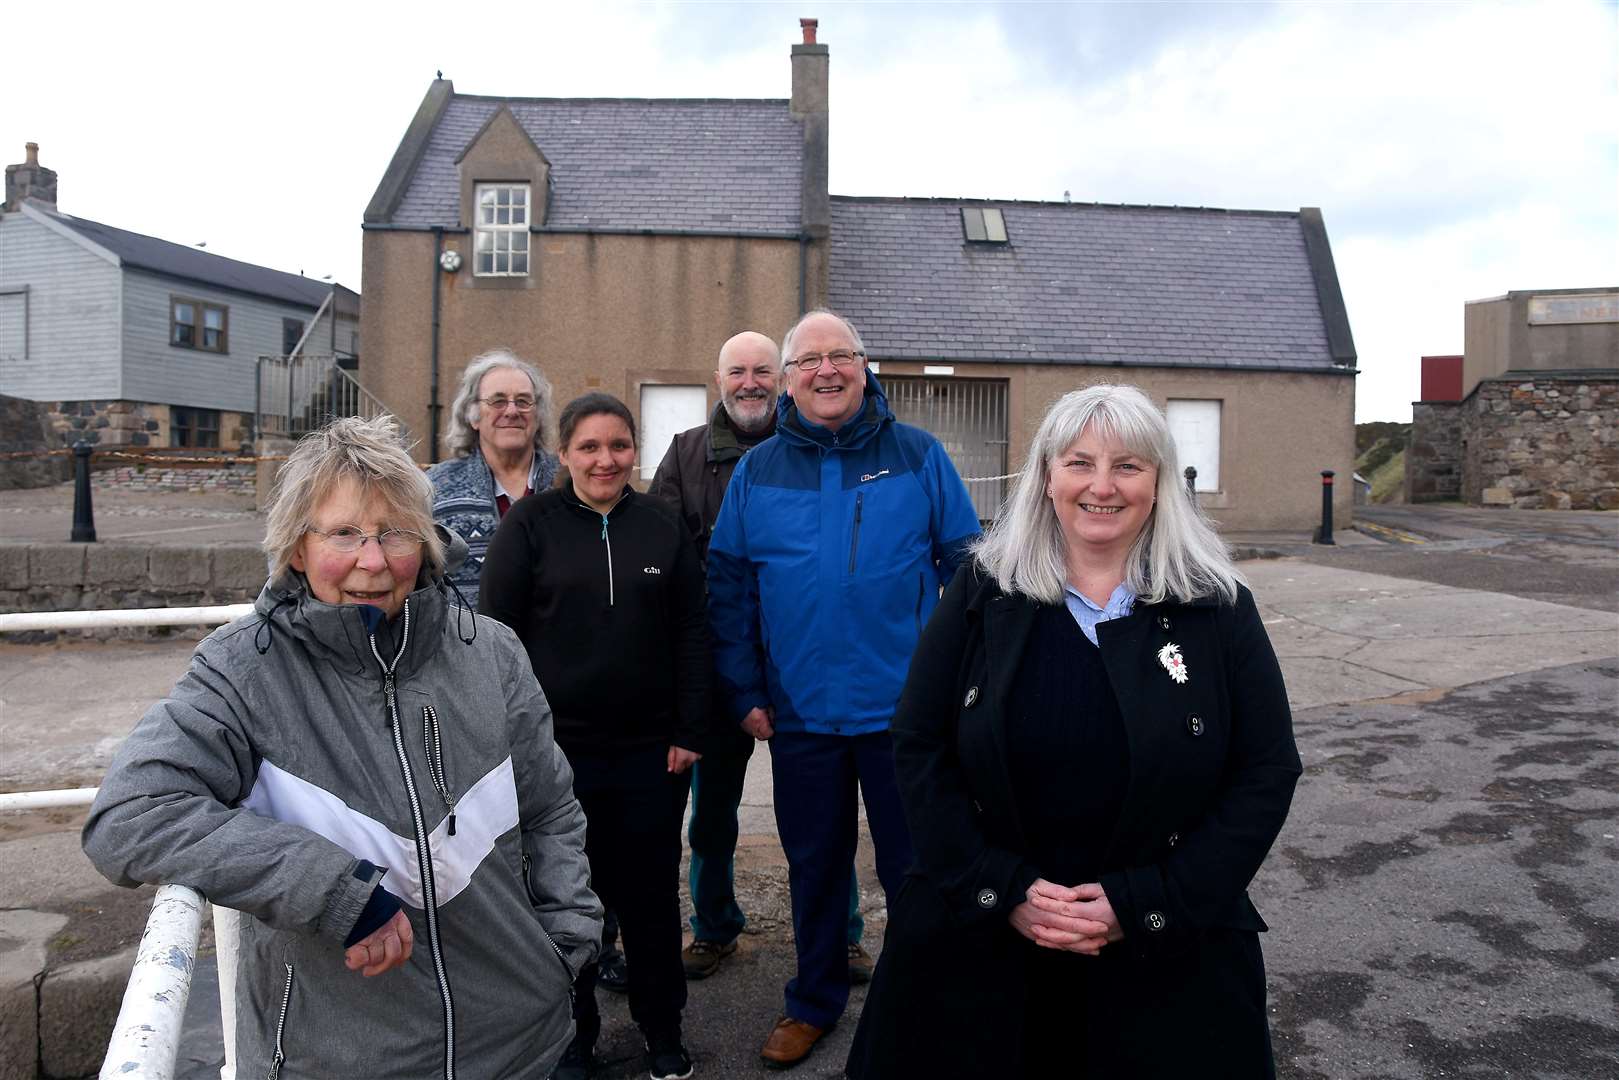 Looking forward to getting renovation work started on the former toilet block are (from left) Cullen Sea School members Rosie Pye, Bert Reid, Angela Hunter, Malcolm Watt, Prof Ashley Mowat and Melanie Newton Picture: Becky Saunderson